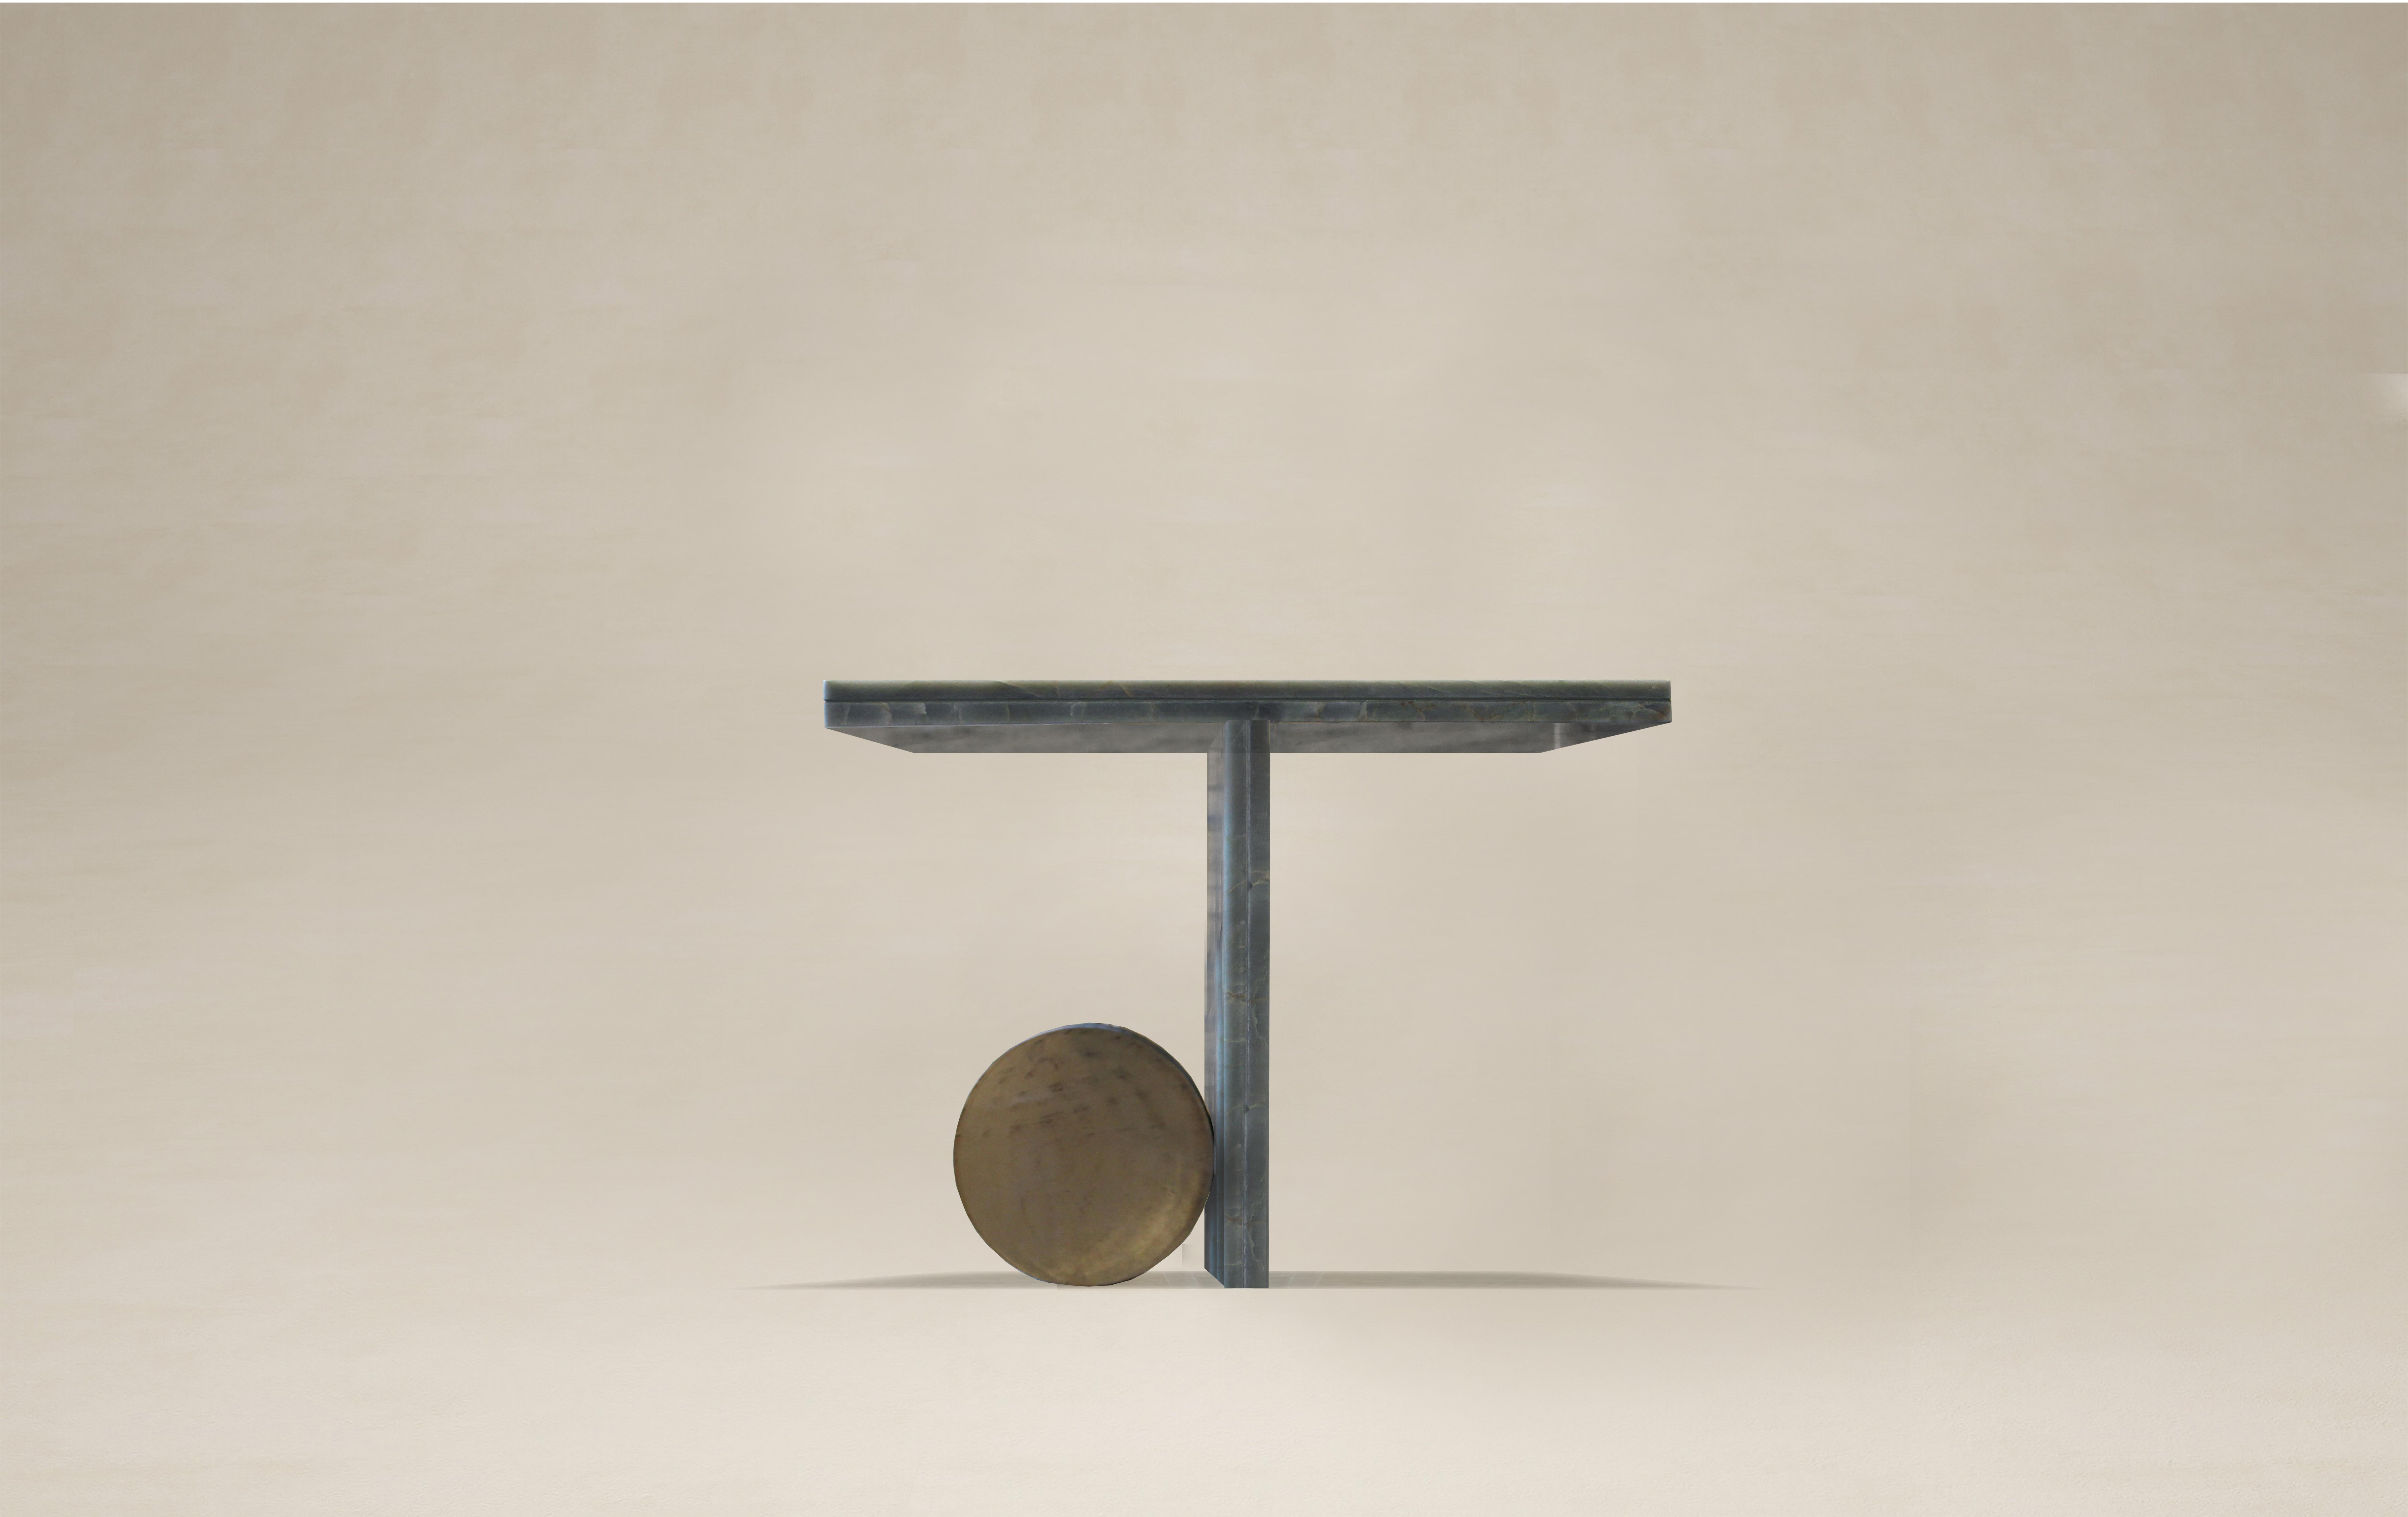 O side table by dAM Atelier 
Dimensions: L 60 x W 60 x H 60 cm
Materials: Green 